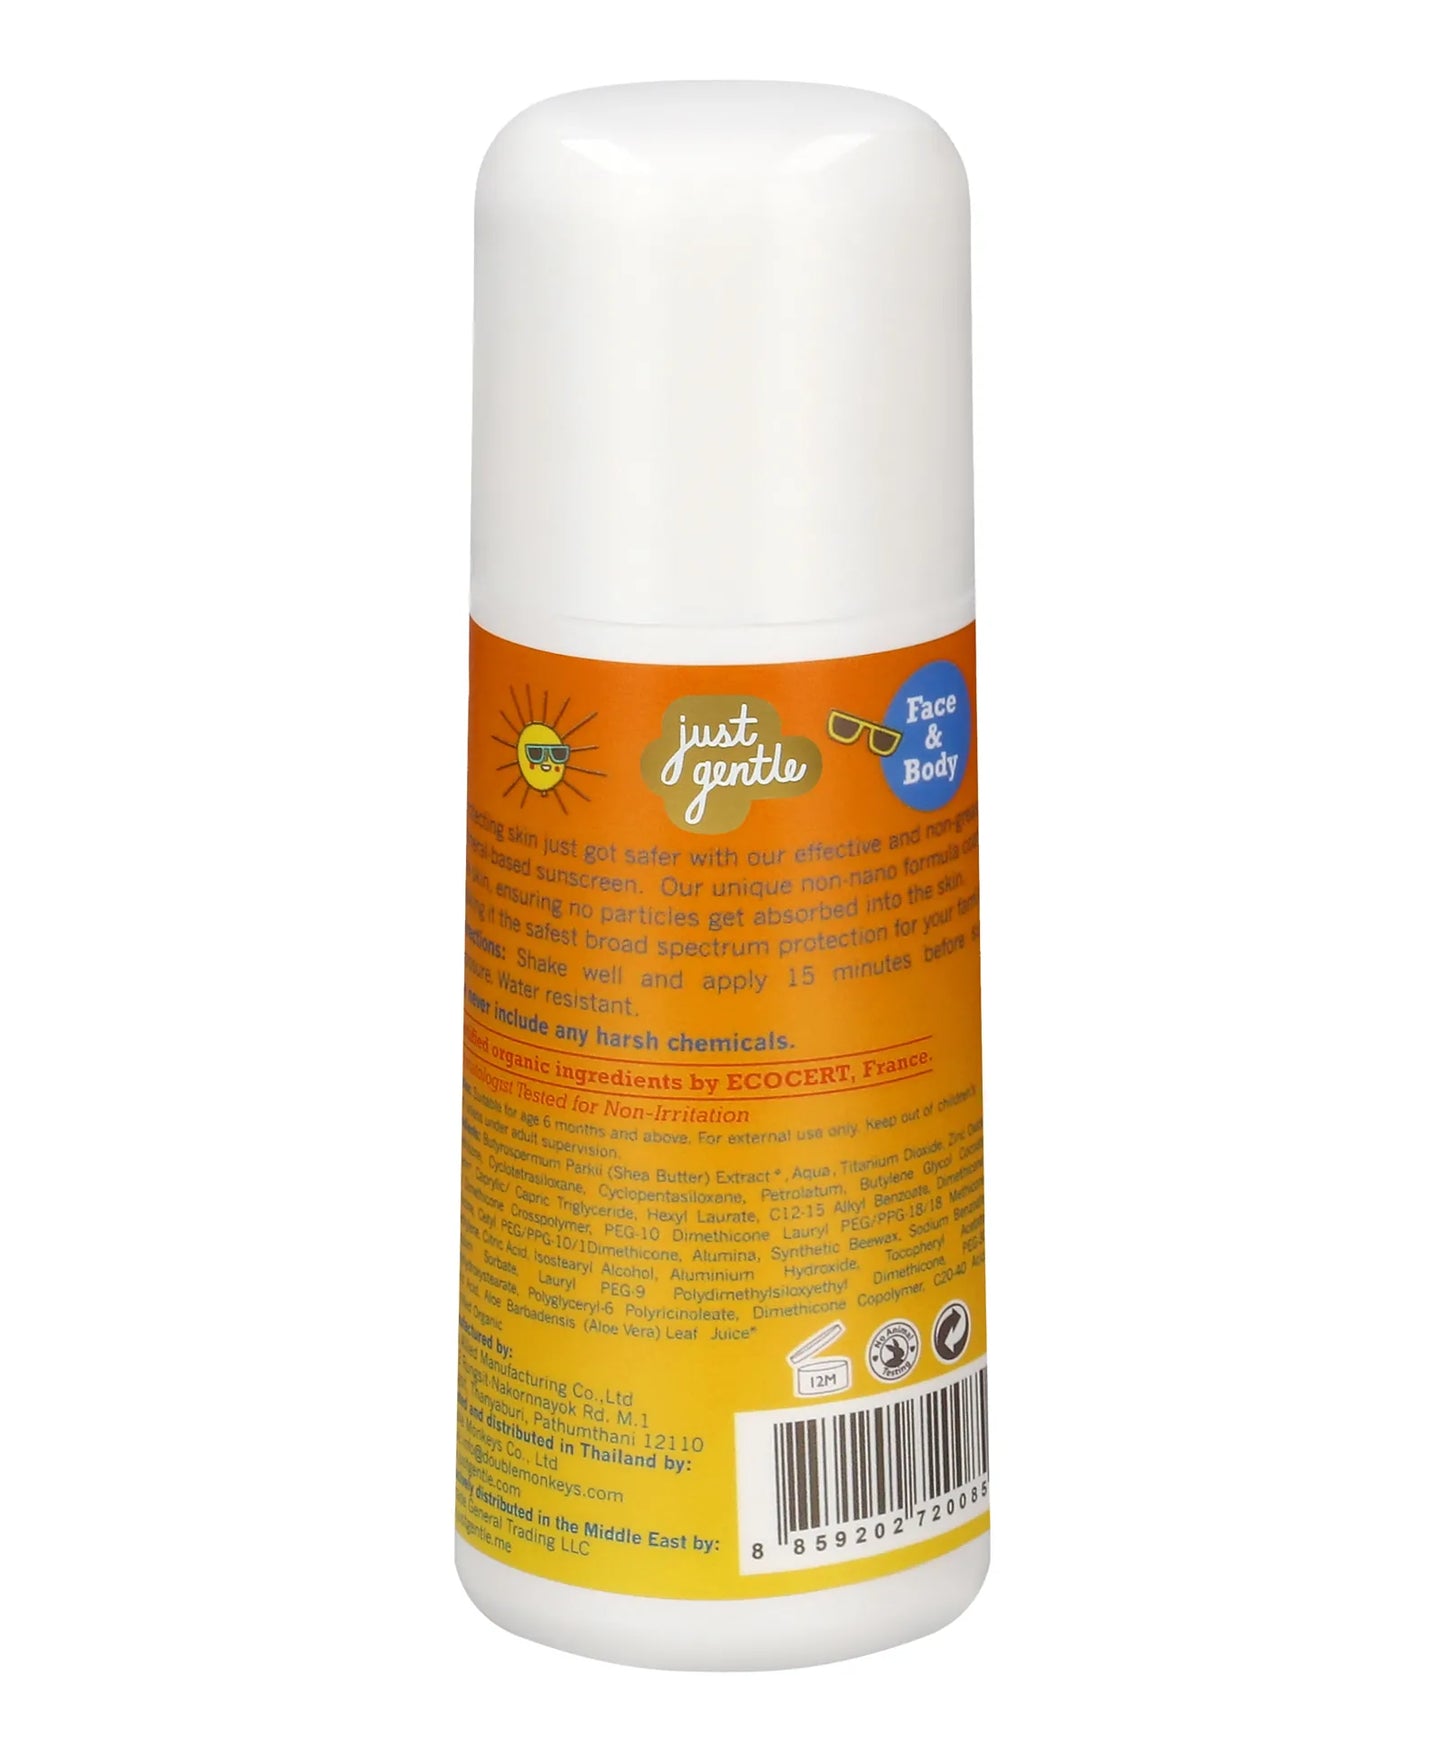 Just Gentle Baby & Kids Sun Protection SPF 50 PA++ 60ml